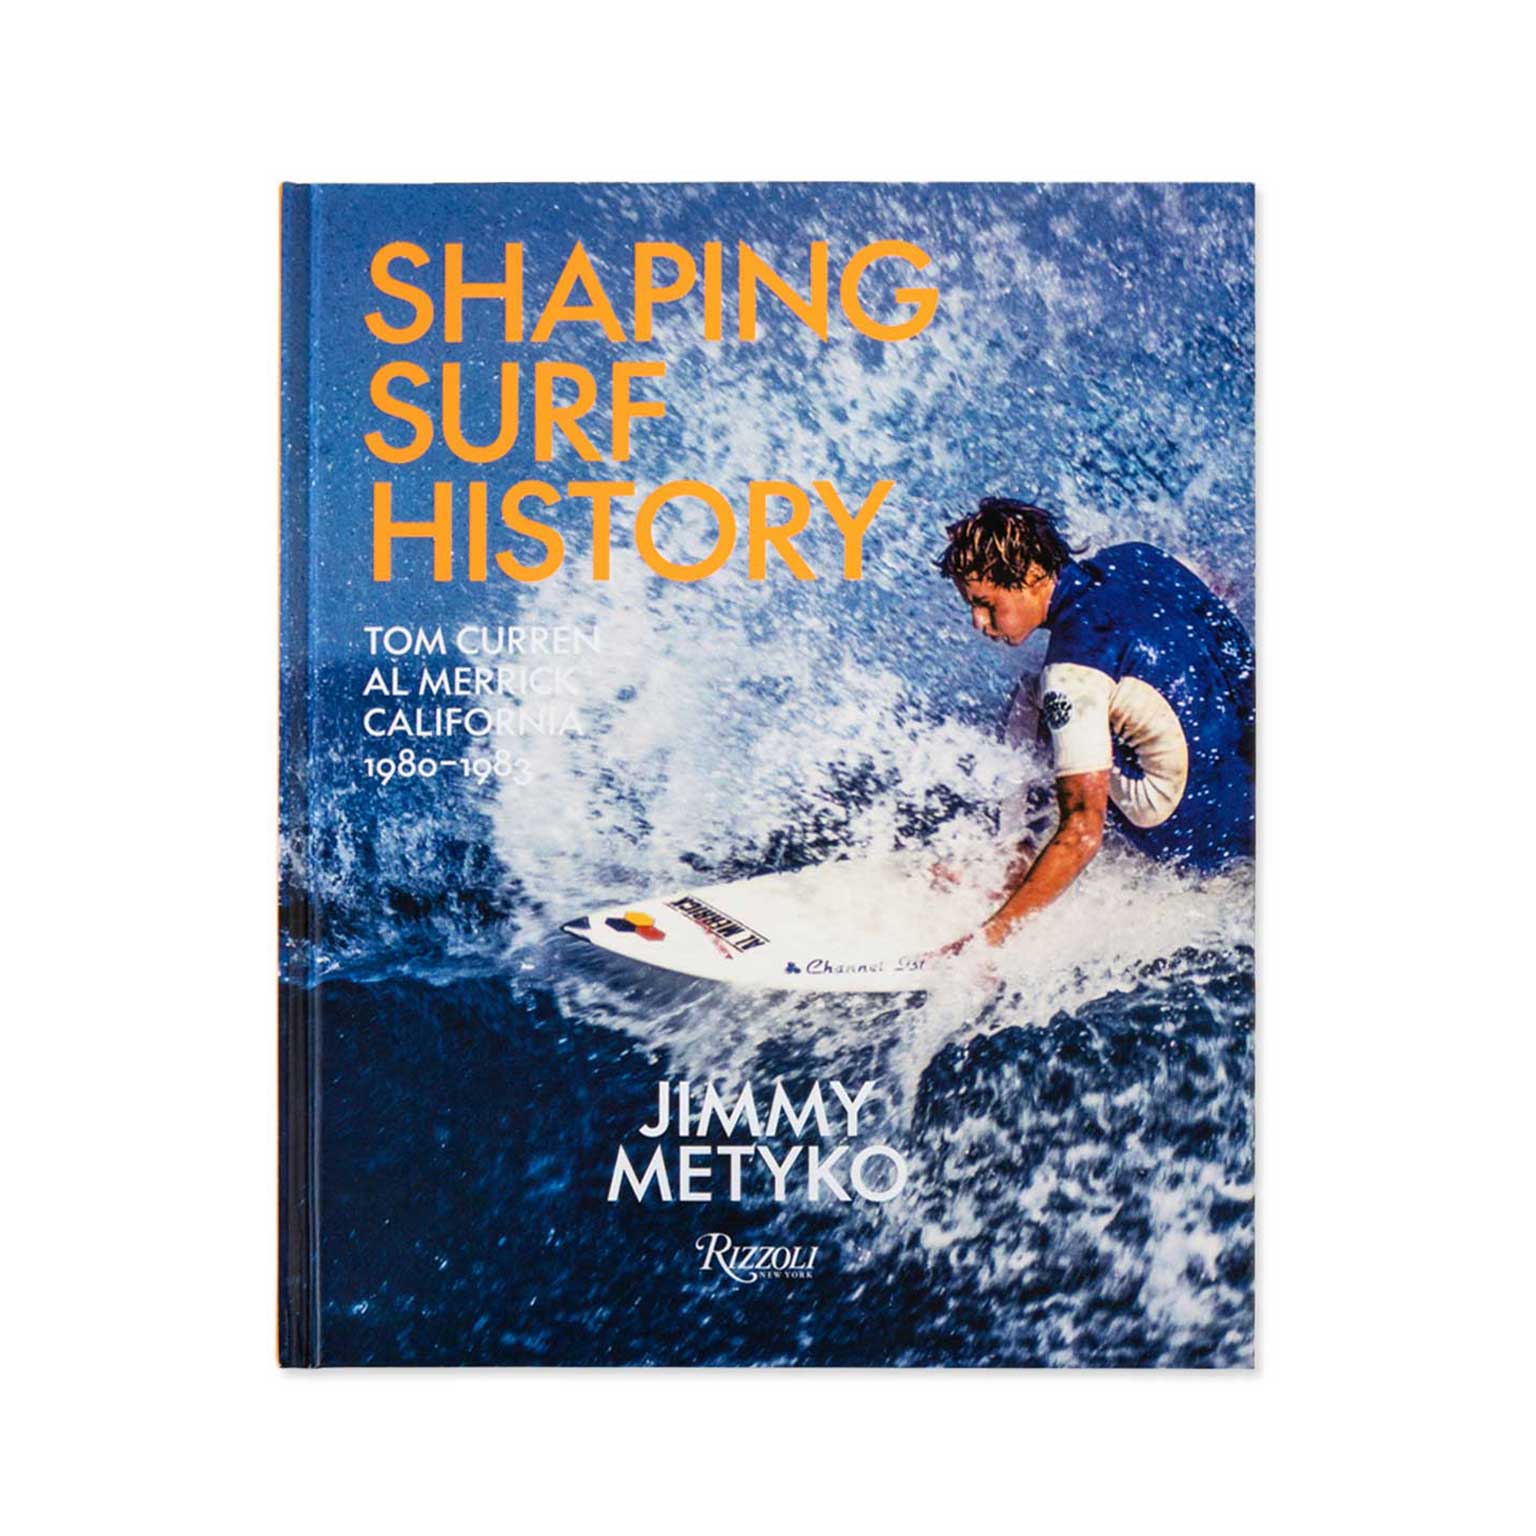 Book- Shaping Surf History: Tom Curren and Al Merrick, California 1980-1983 by Jimmy Metyko and Kelly Slater